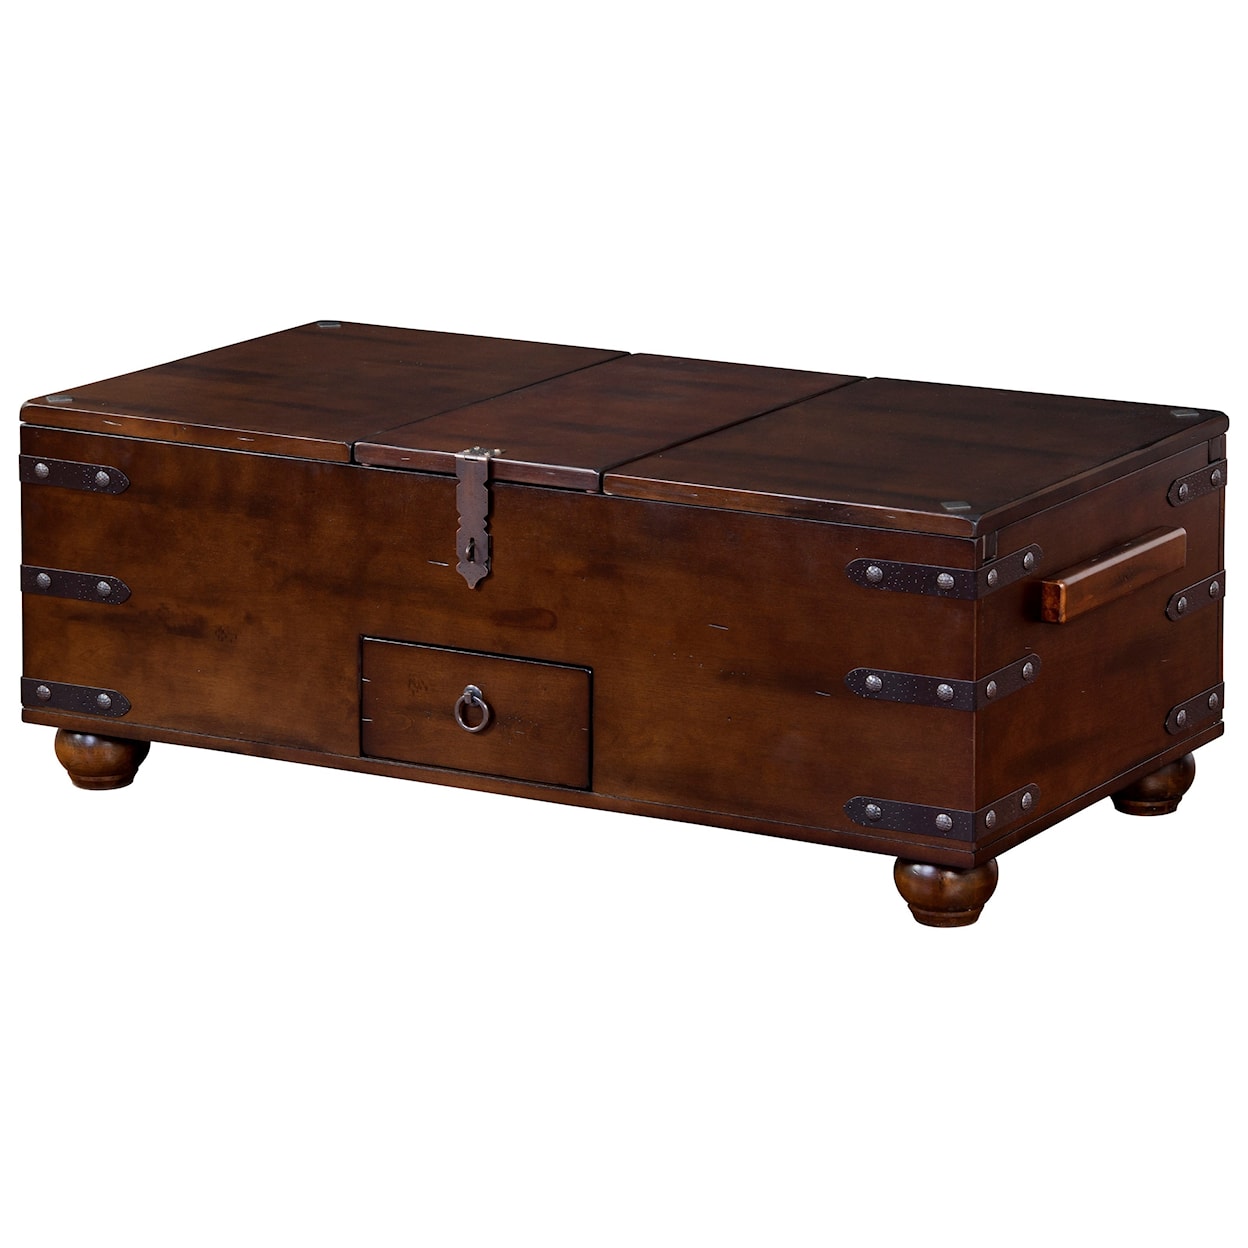 Sunny Designs 12136 Trunk Coffee Table